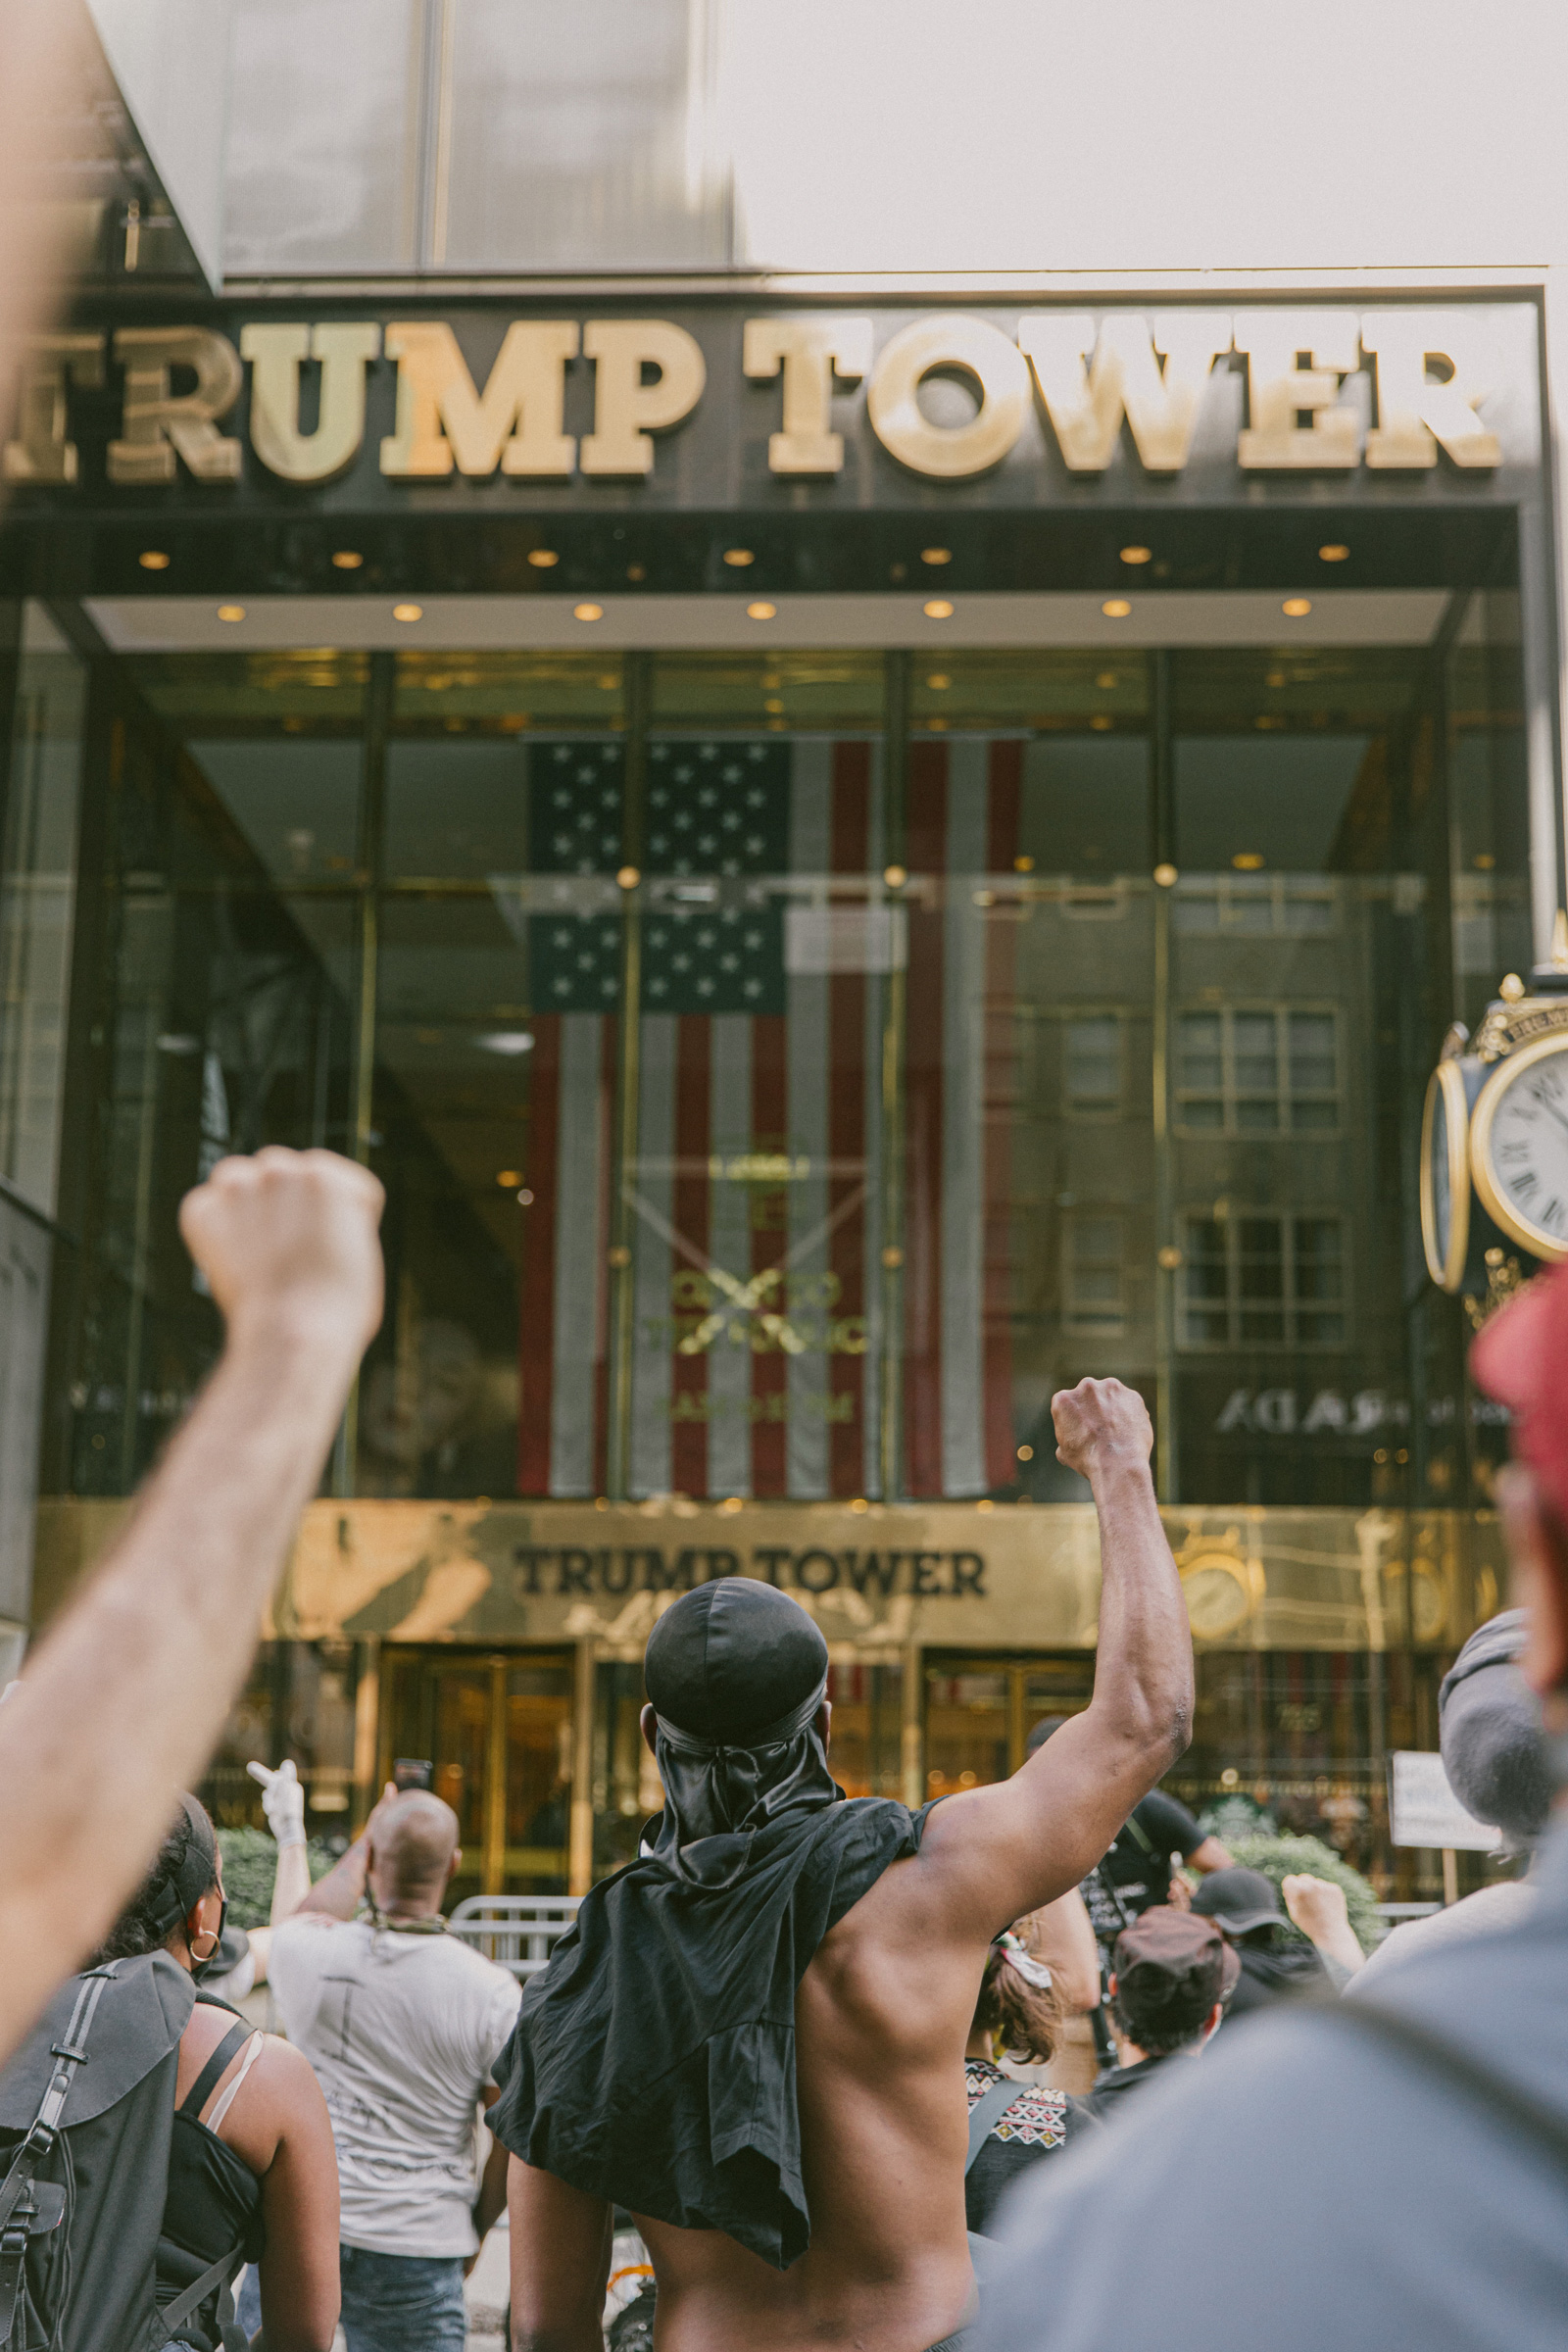 Protestors marching down 5th Avenue stop and stand before Trump Tower in New York City, May 30, 2020. (Mark Clennon)